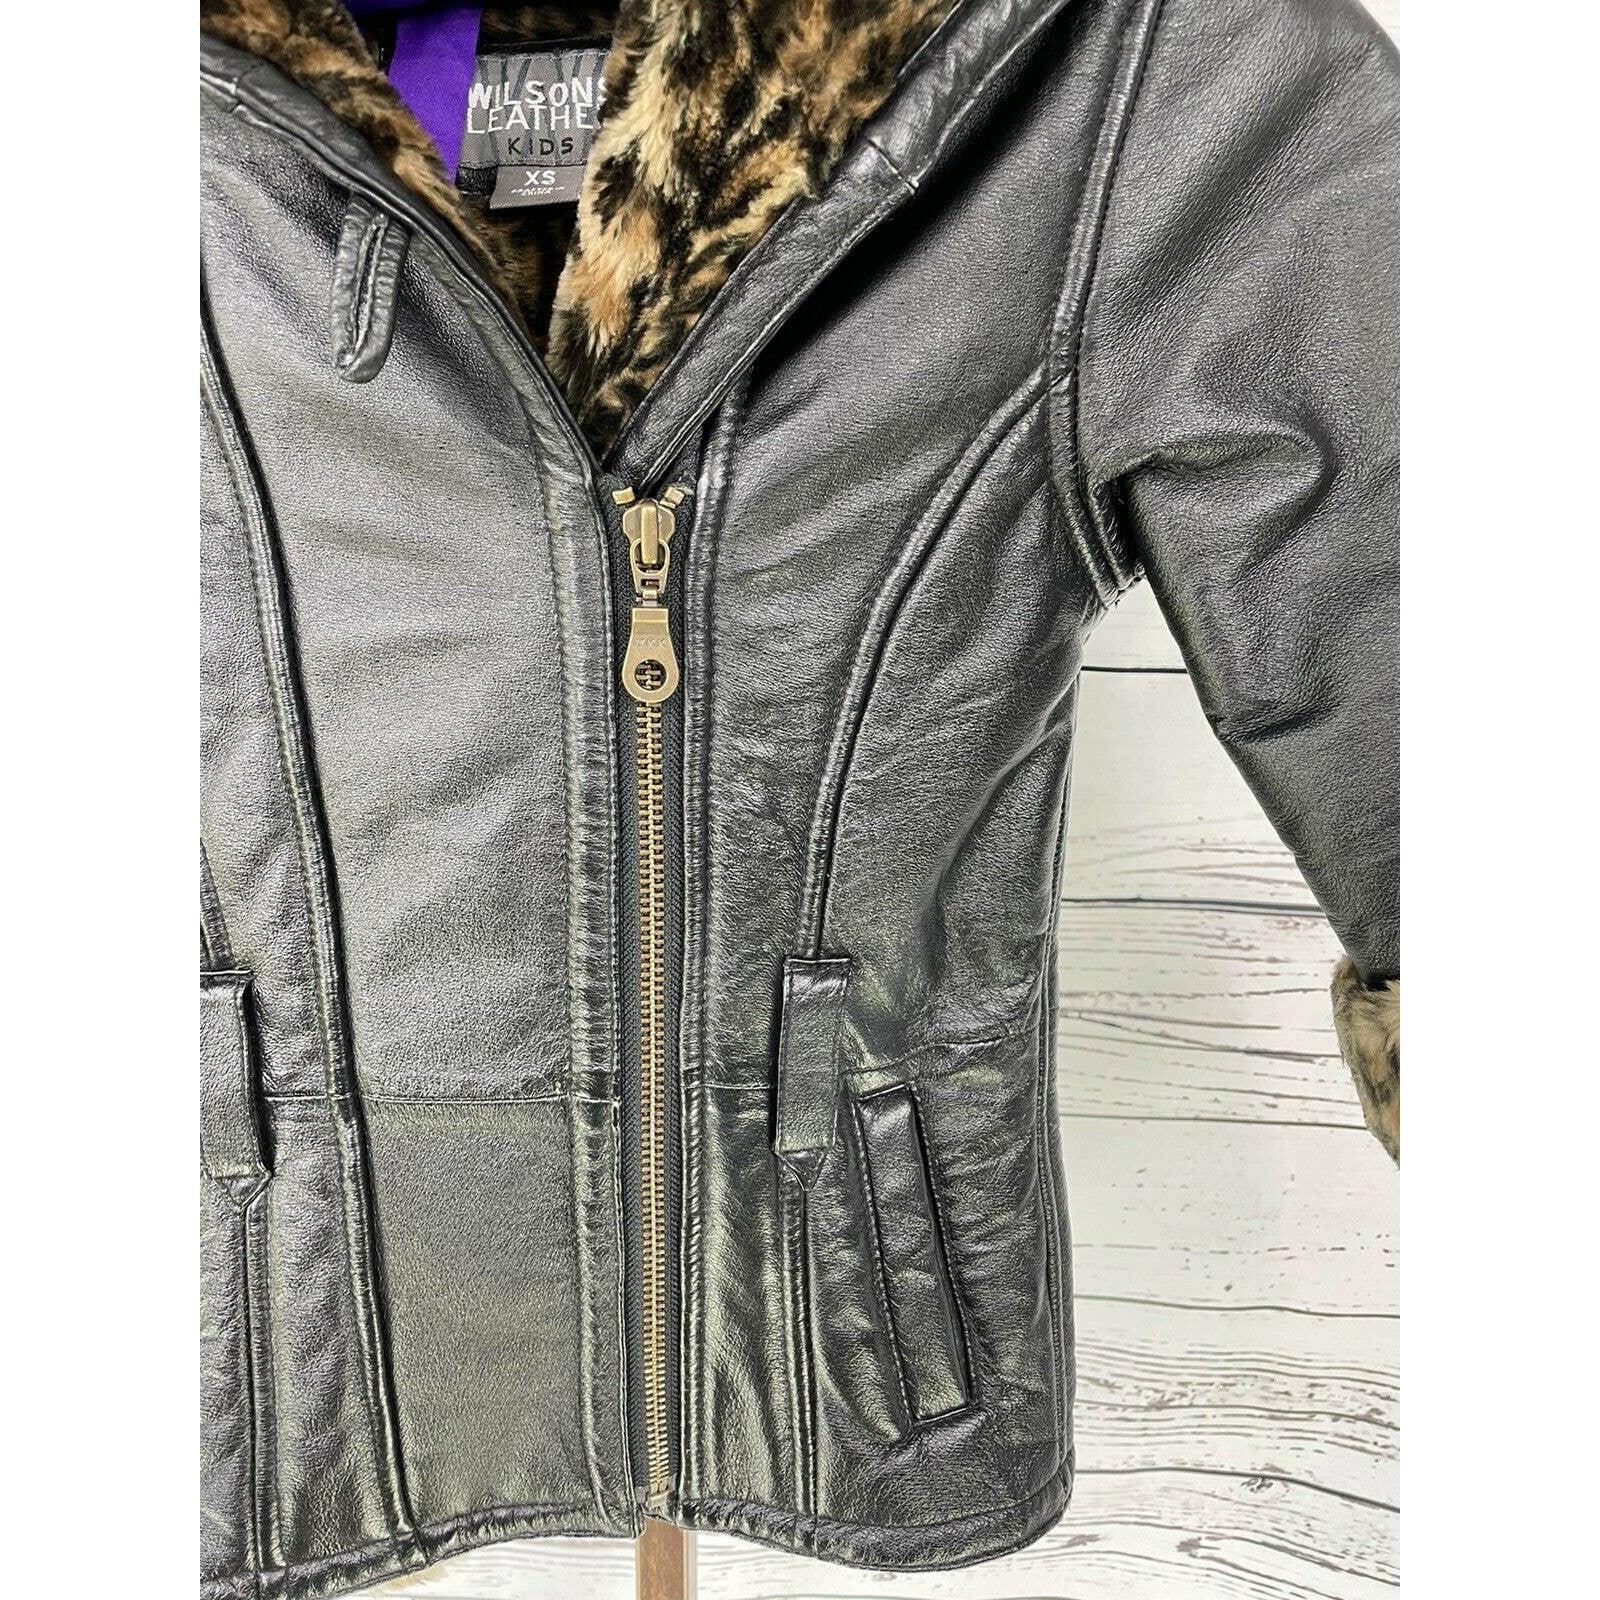 Wilsons Leather Hooded Jacket Girls Extra Small Leopard Lined Fur Black XS